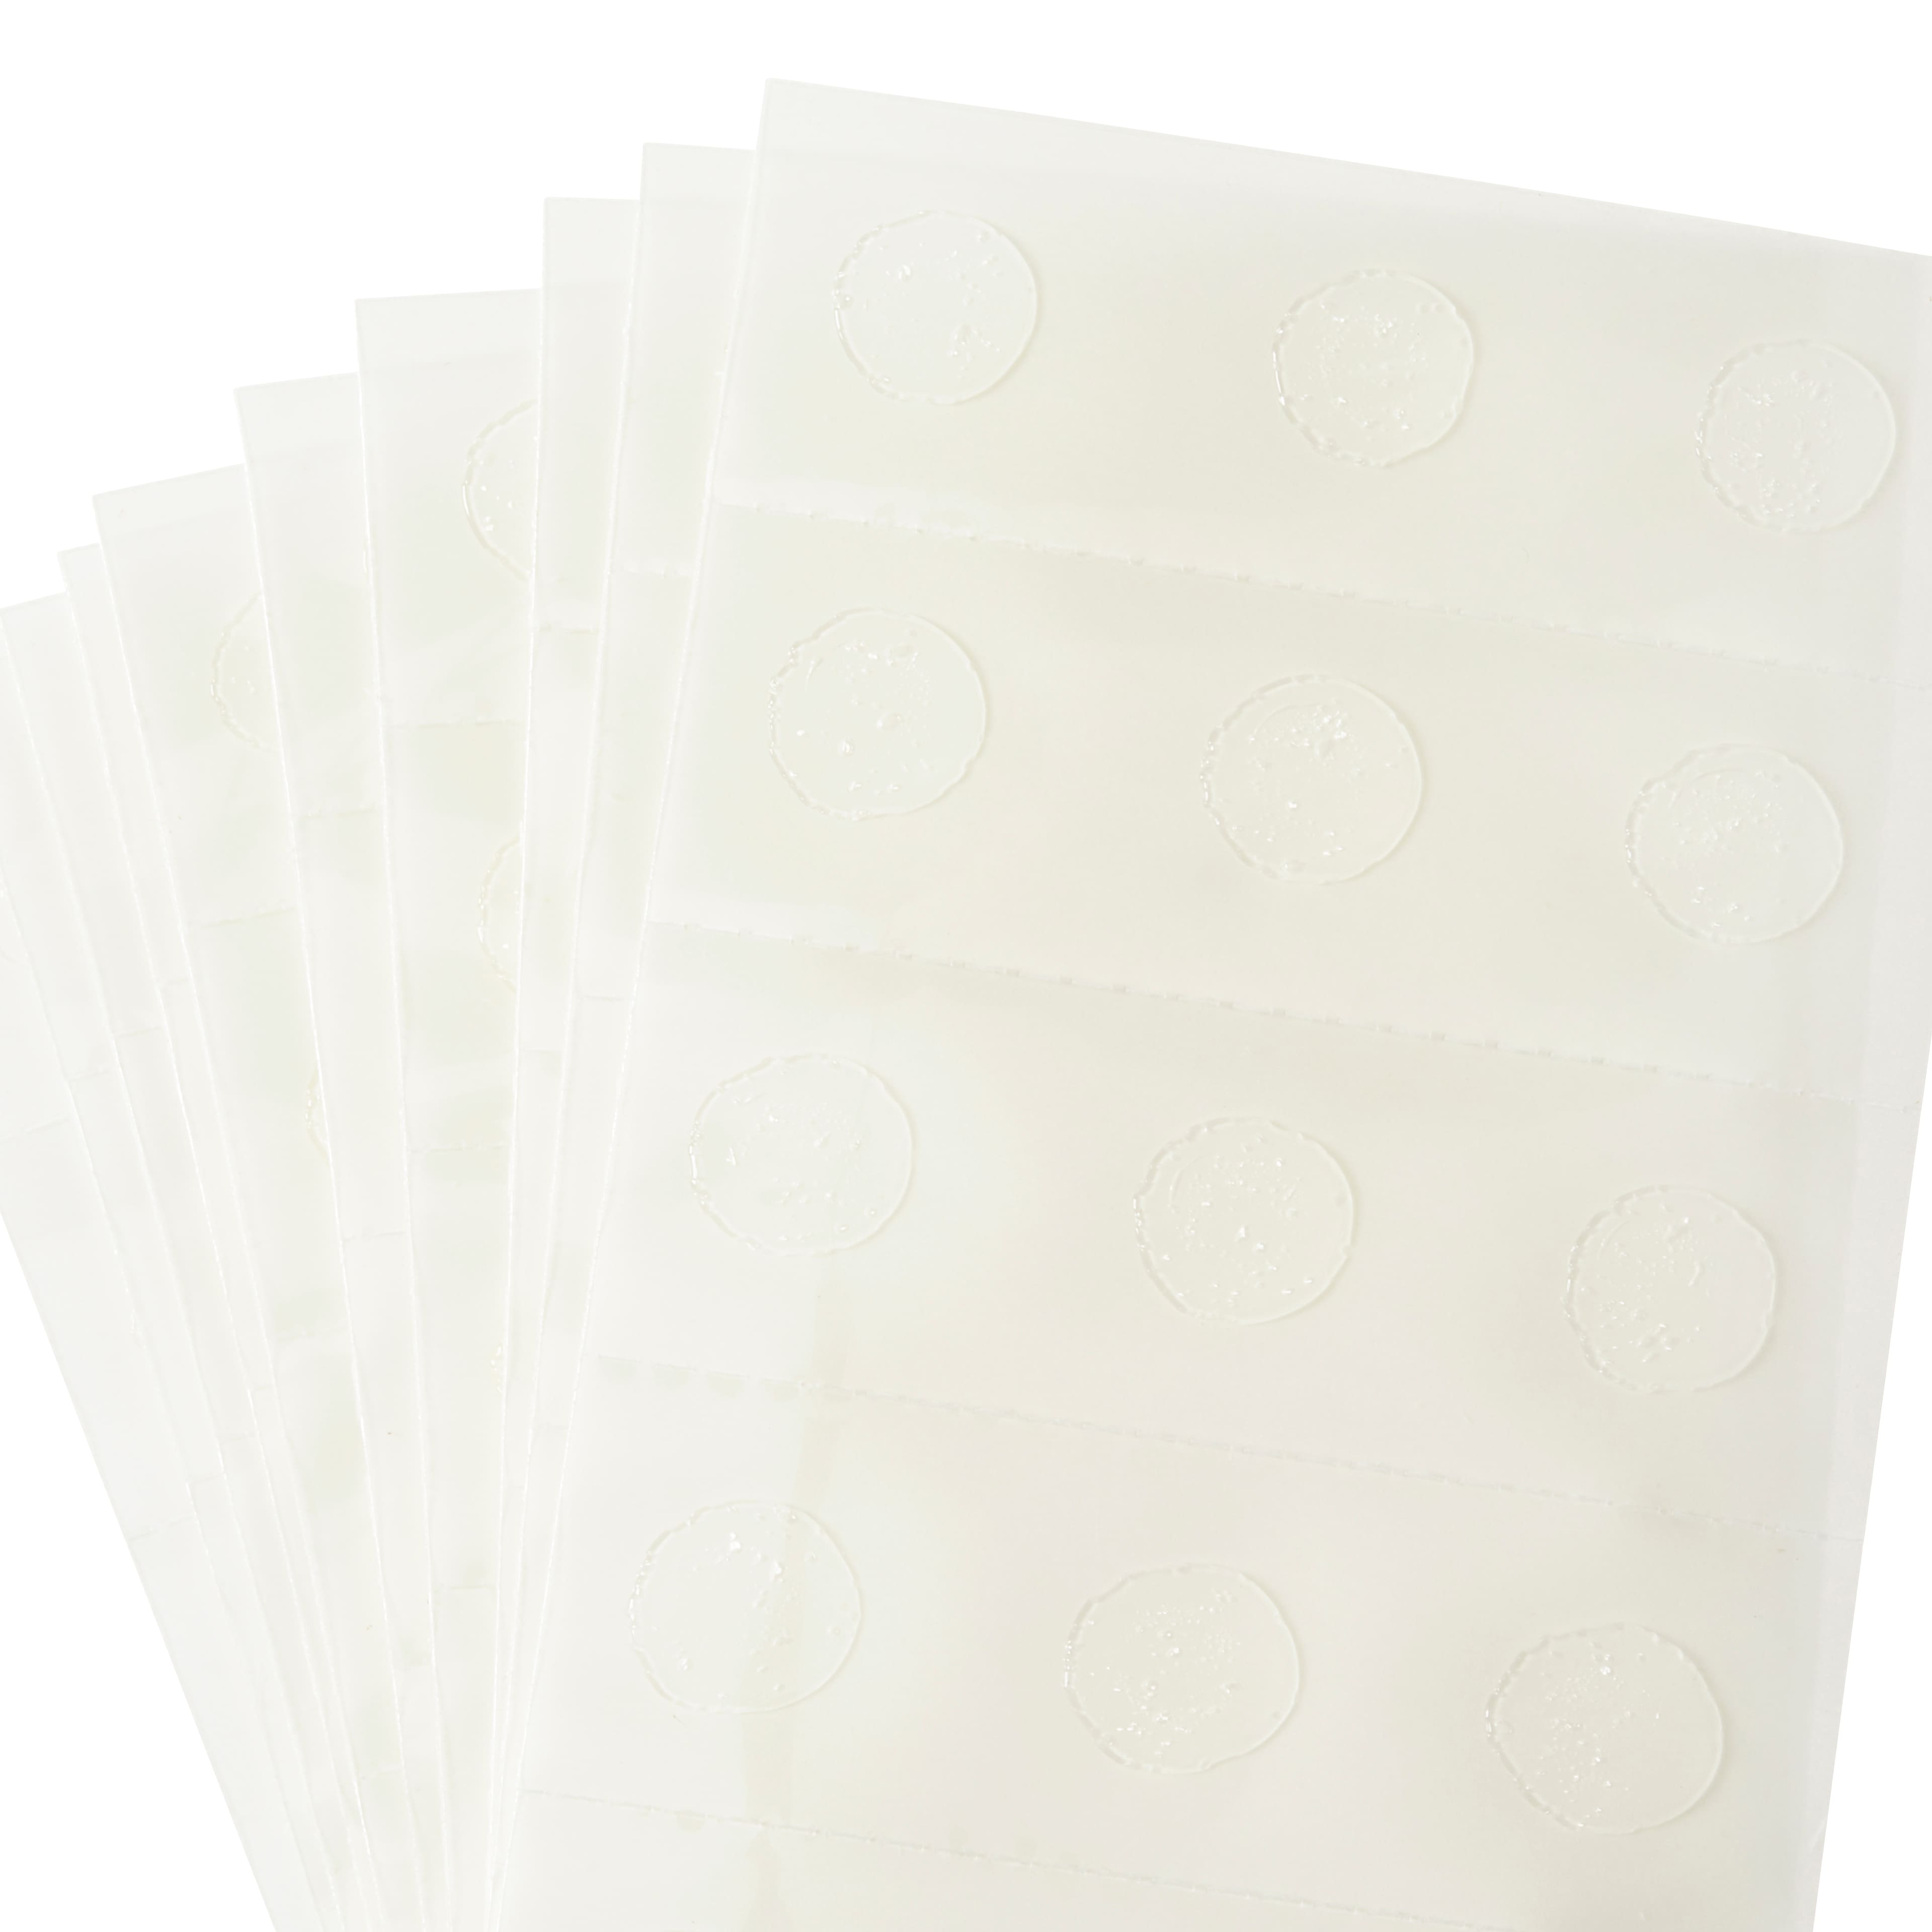  Gorilla Permanent Adhesive Dots, Double-Sided, 150